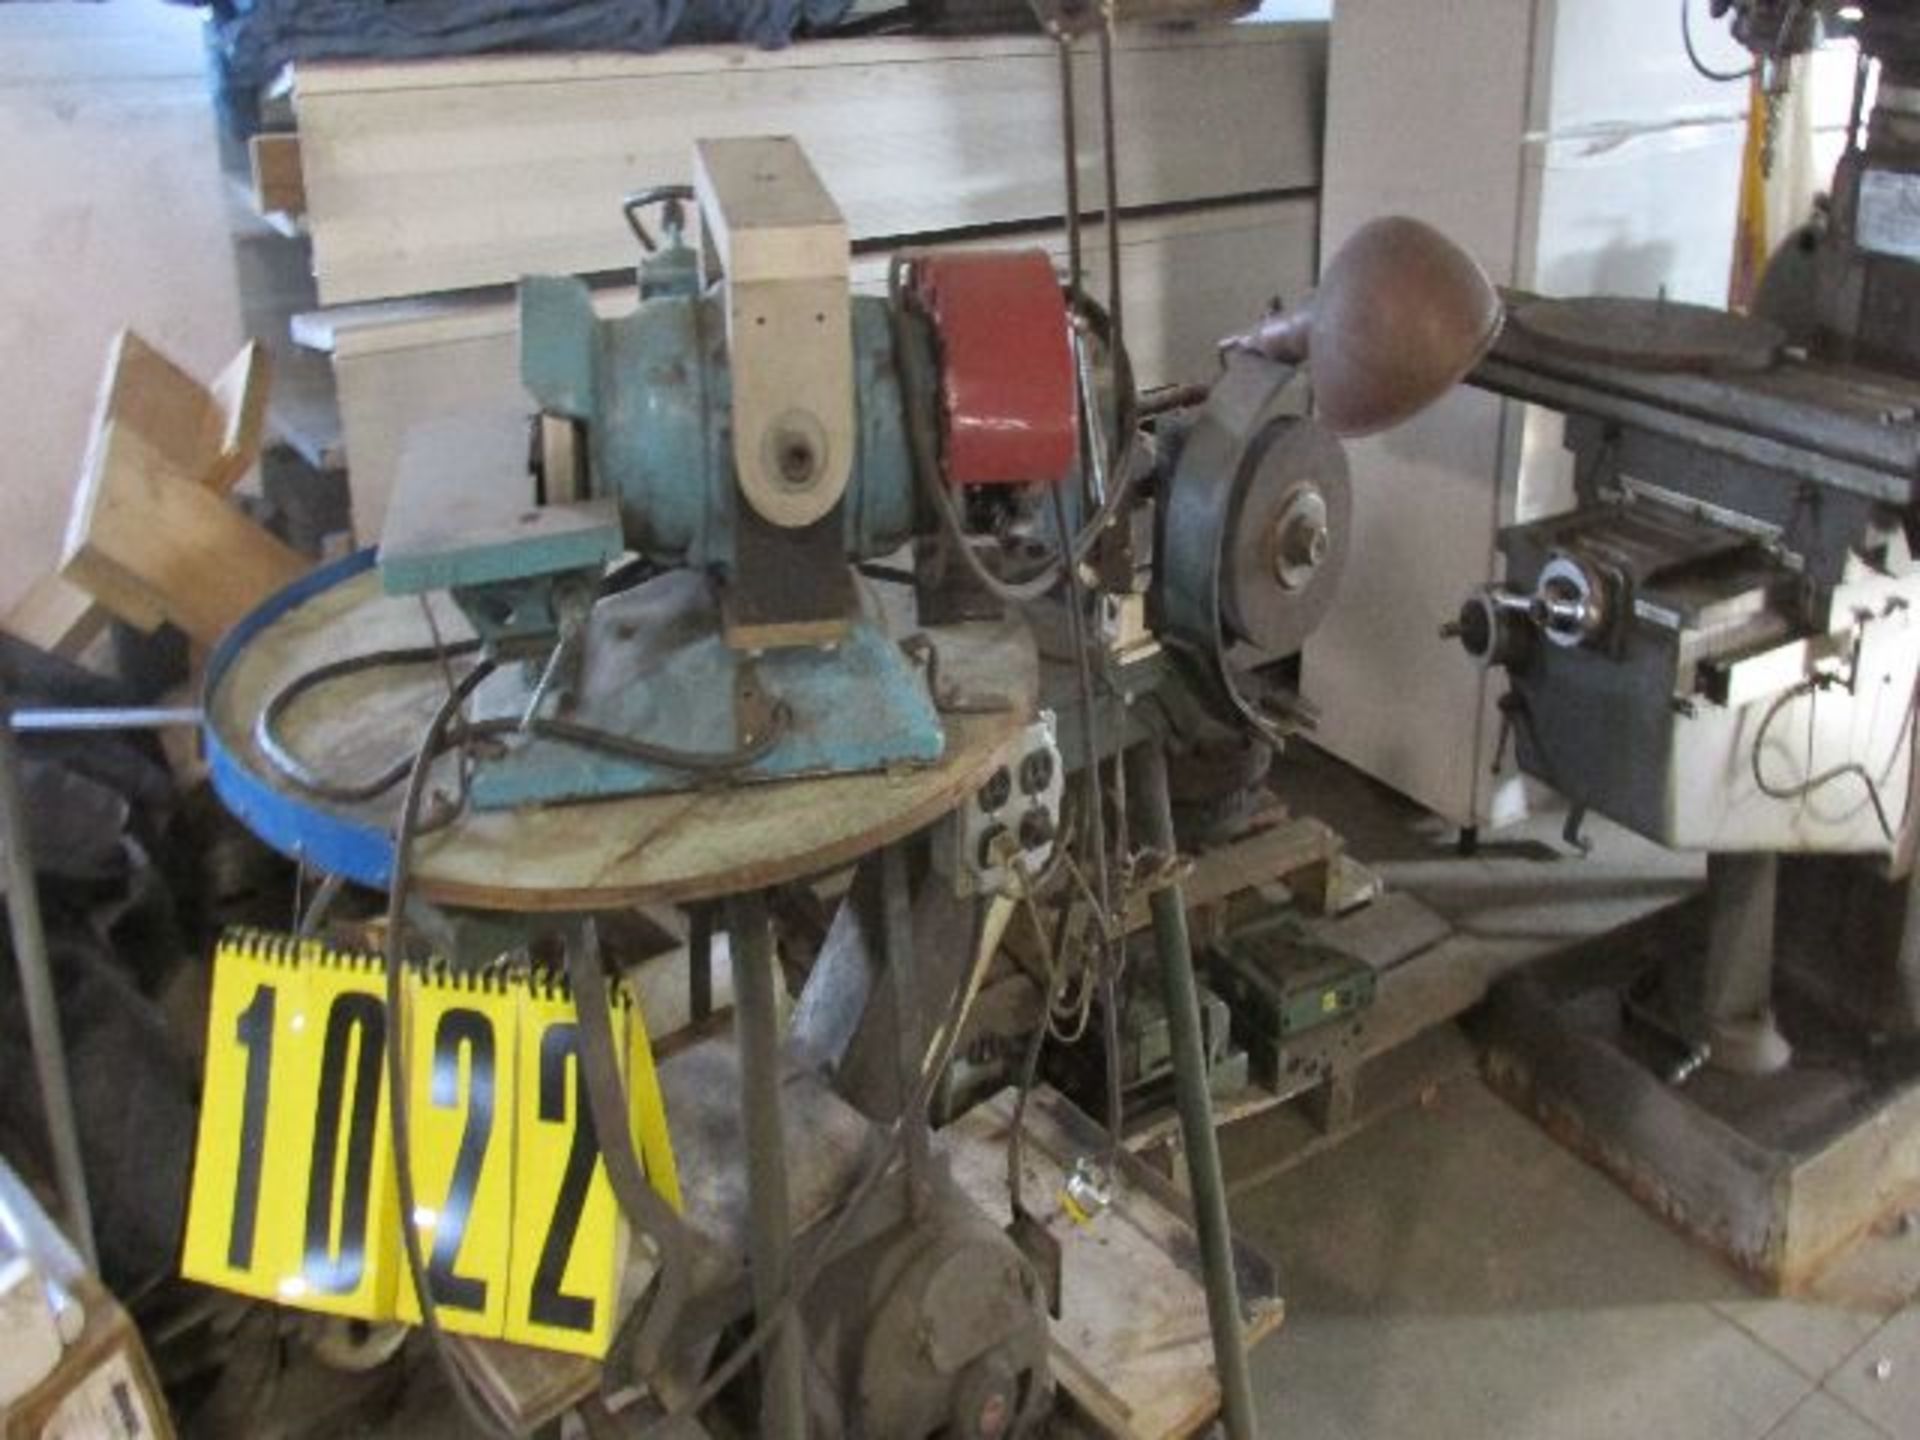 Shopmade grinding station, (2) double spindle grinders, (1) 1/2 hp w/roward reverse, (1) 1 hp belt